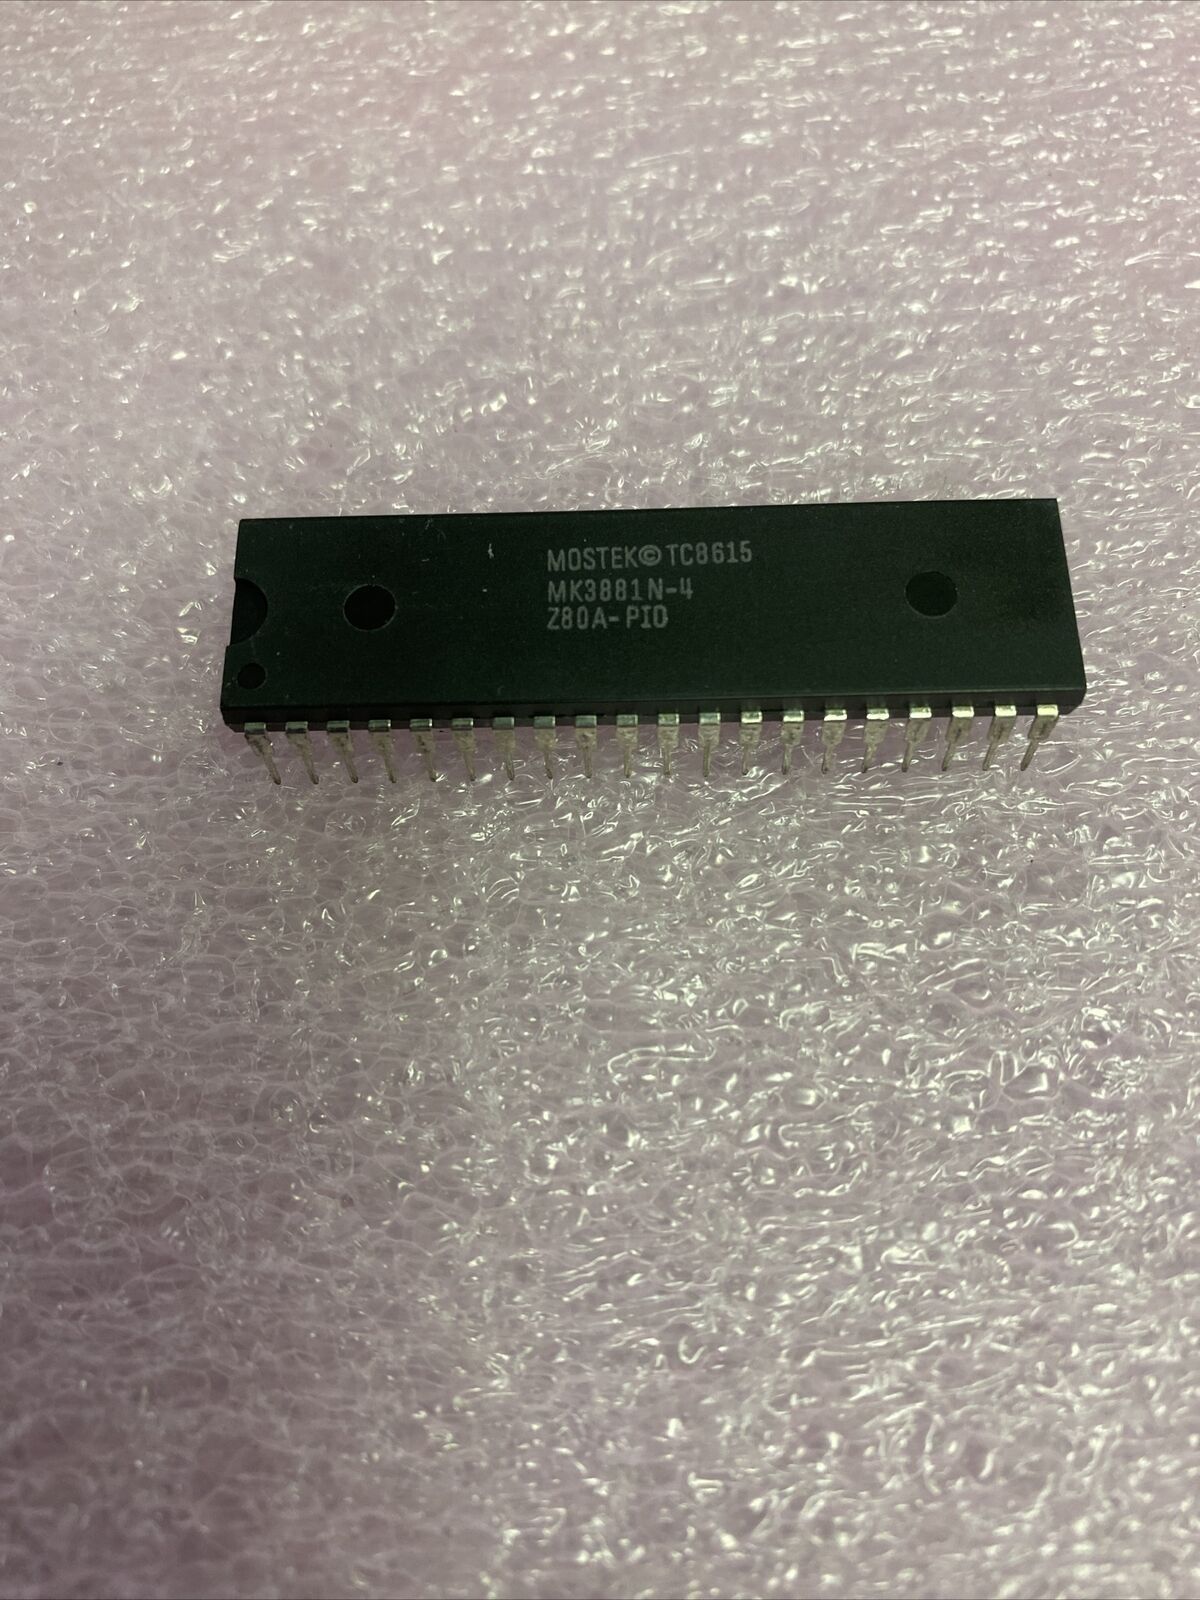 5 pcs IC Z80 PIO chip, MOSTEK MK3881N-4 Likely New Old Stock